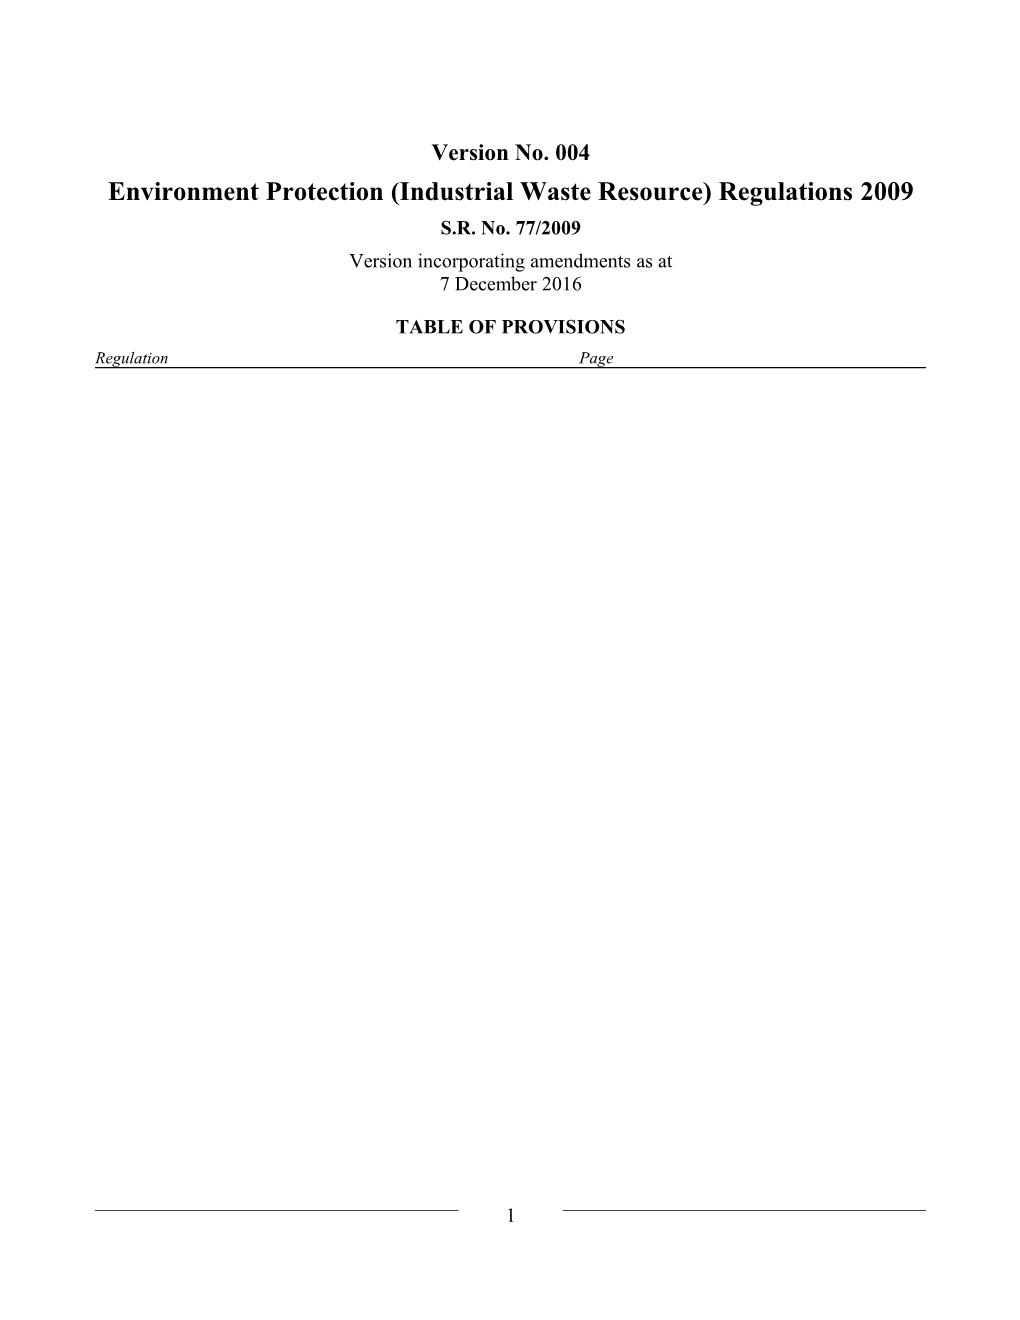 Environment Protection (Industrial Waste Resource) Regulations 2009